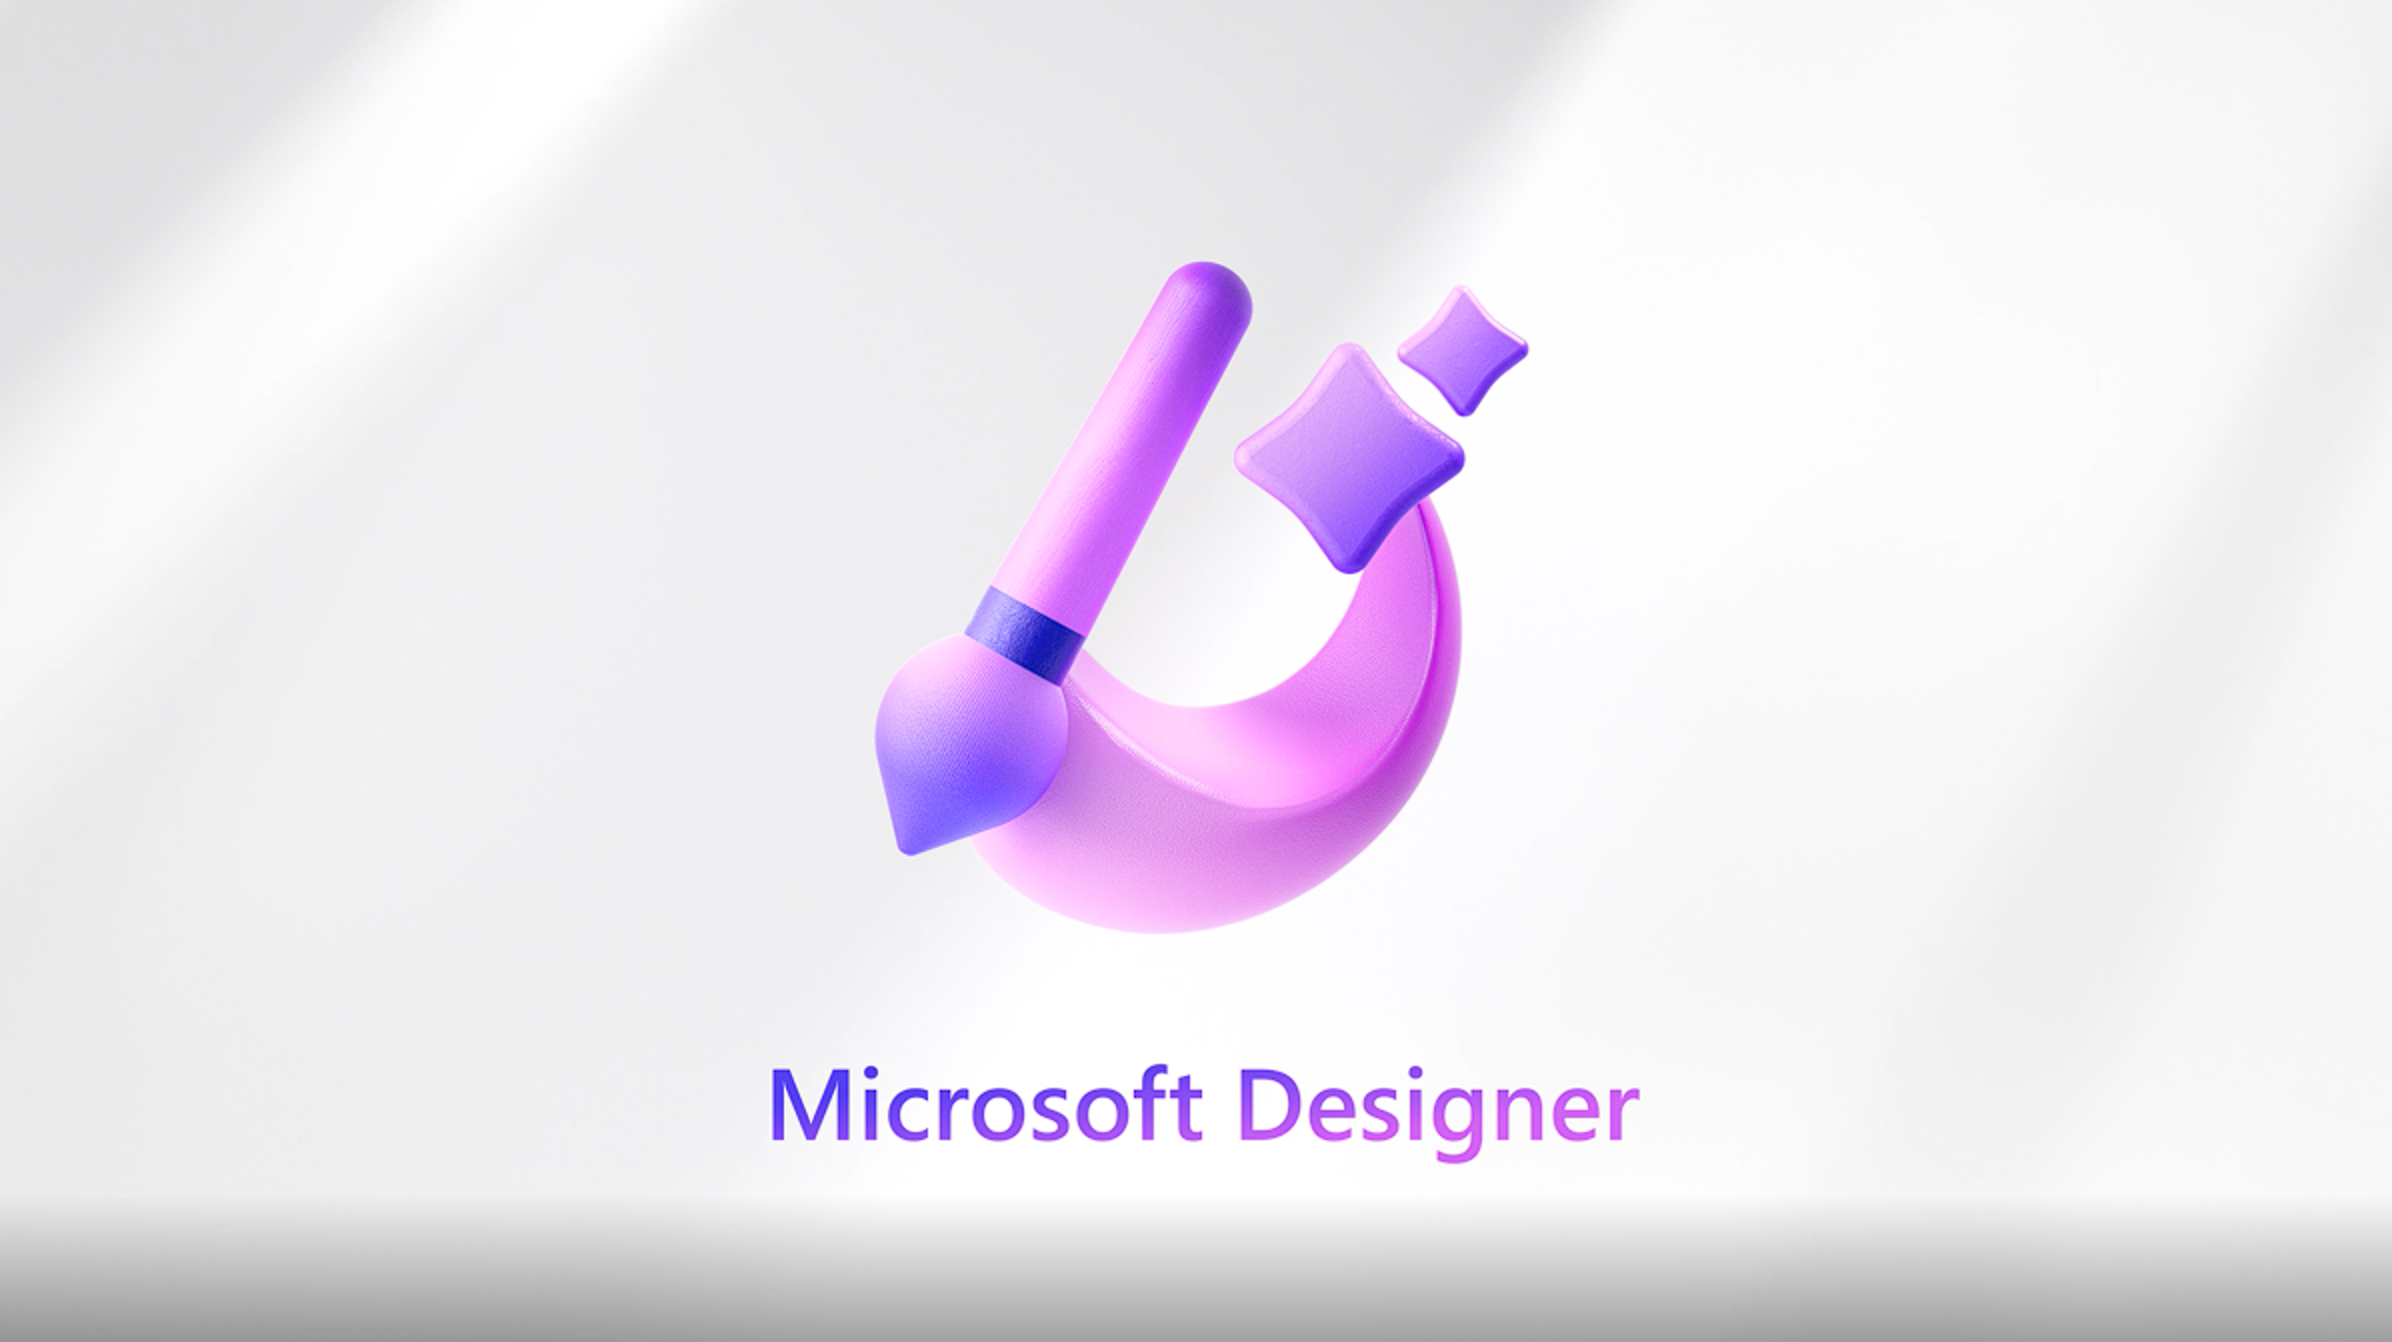 Microsoft Designer Doesn’t Have a Waitlist Anymore